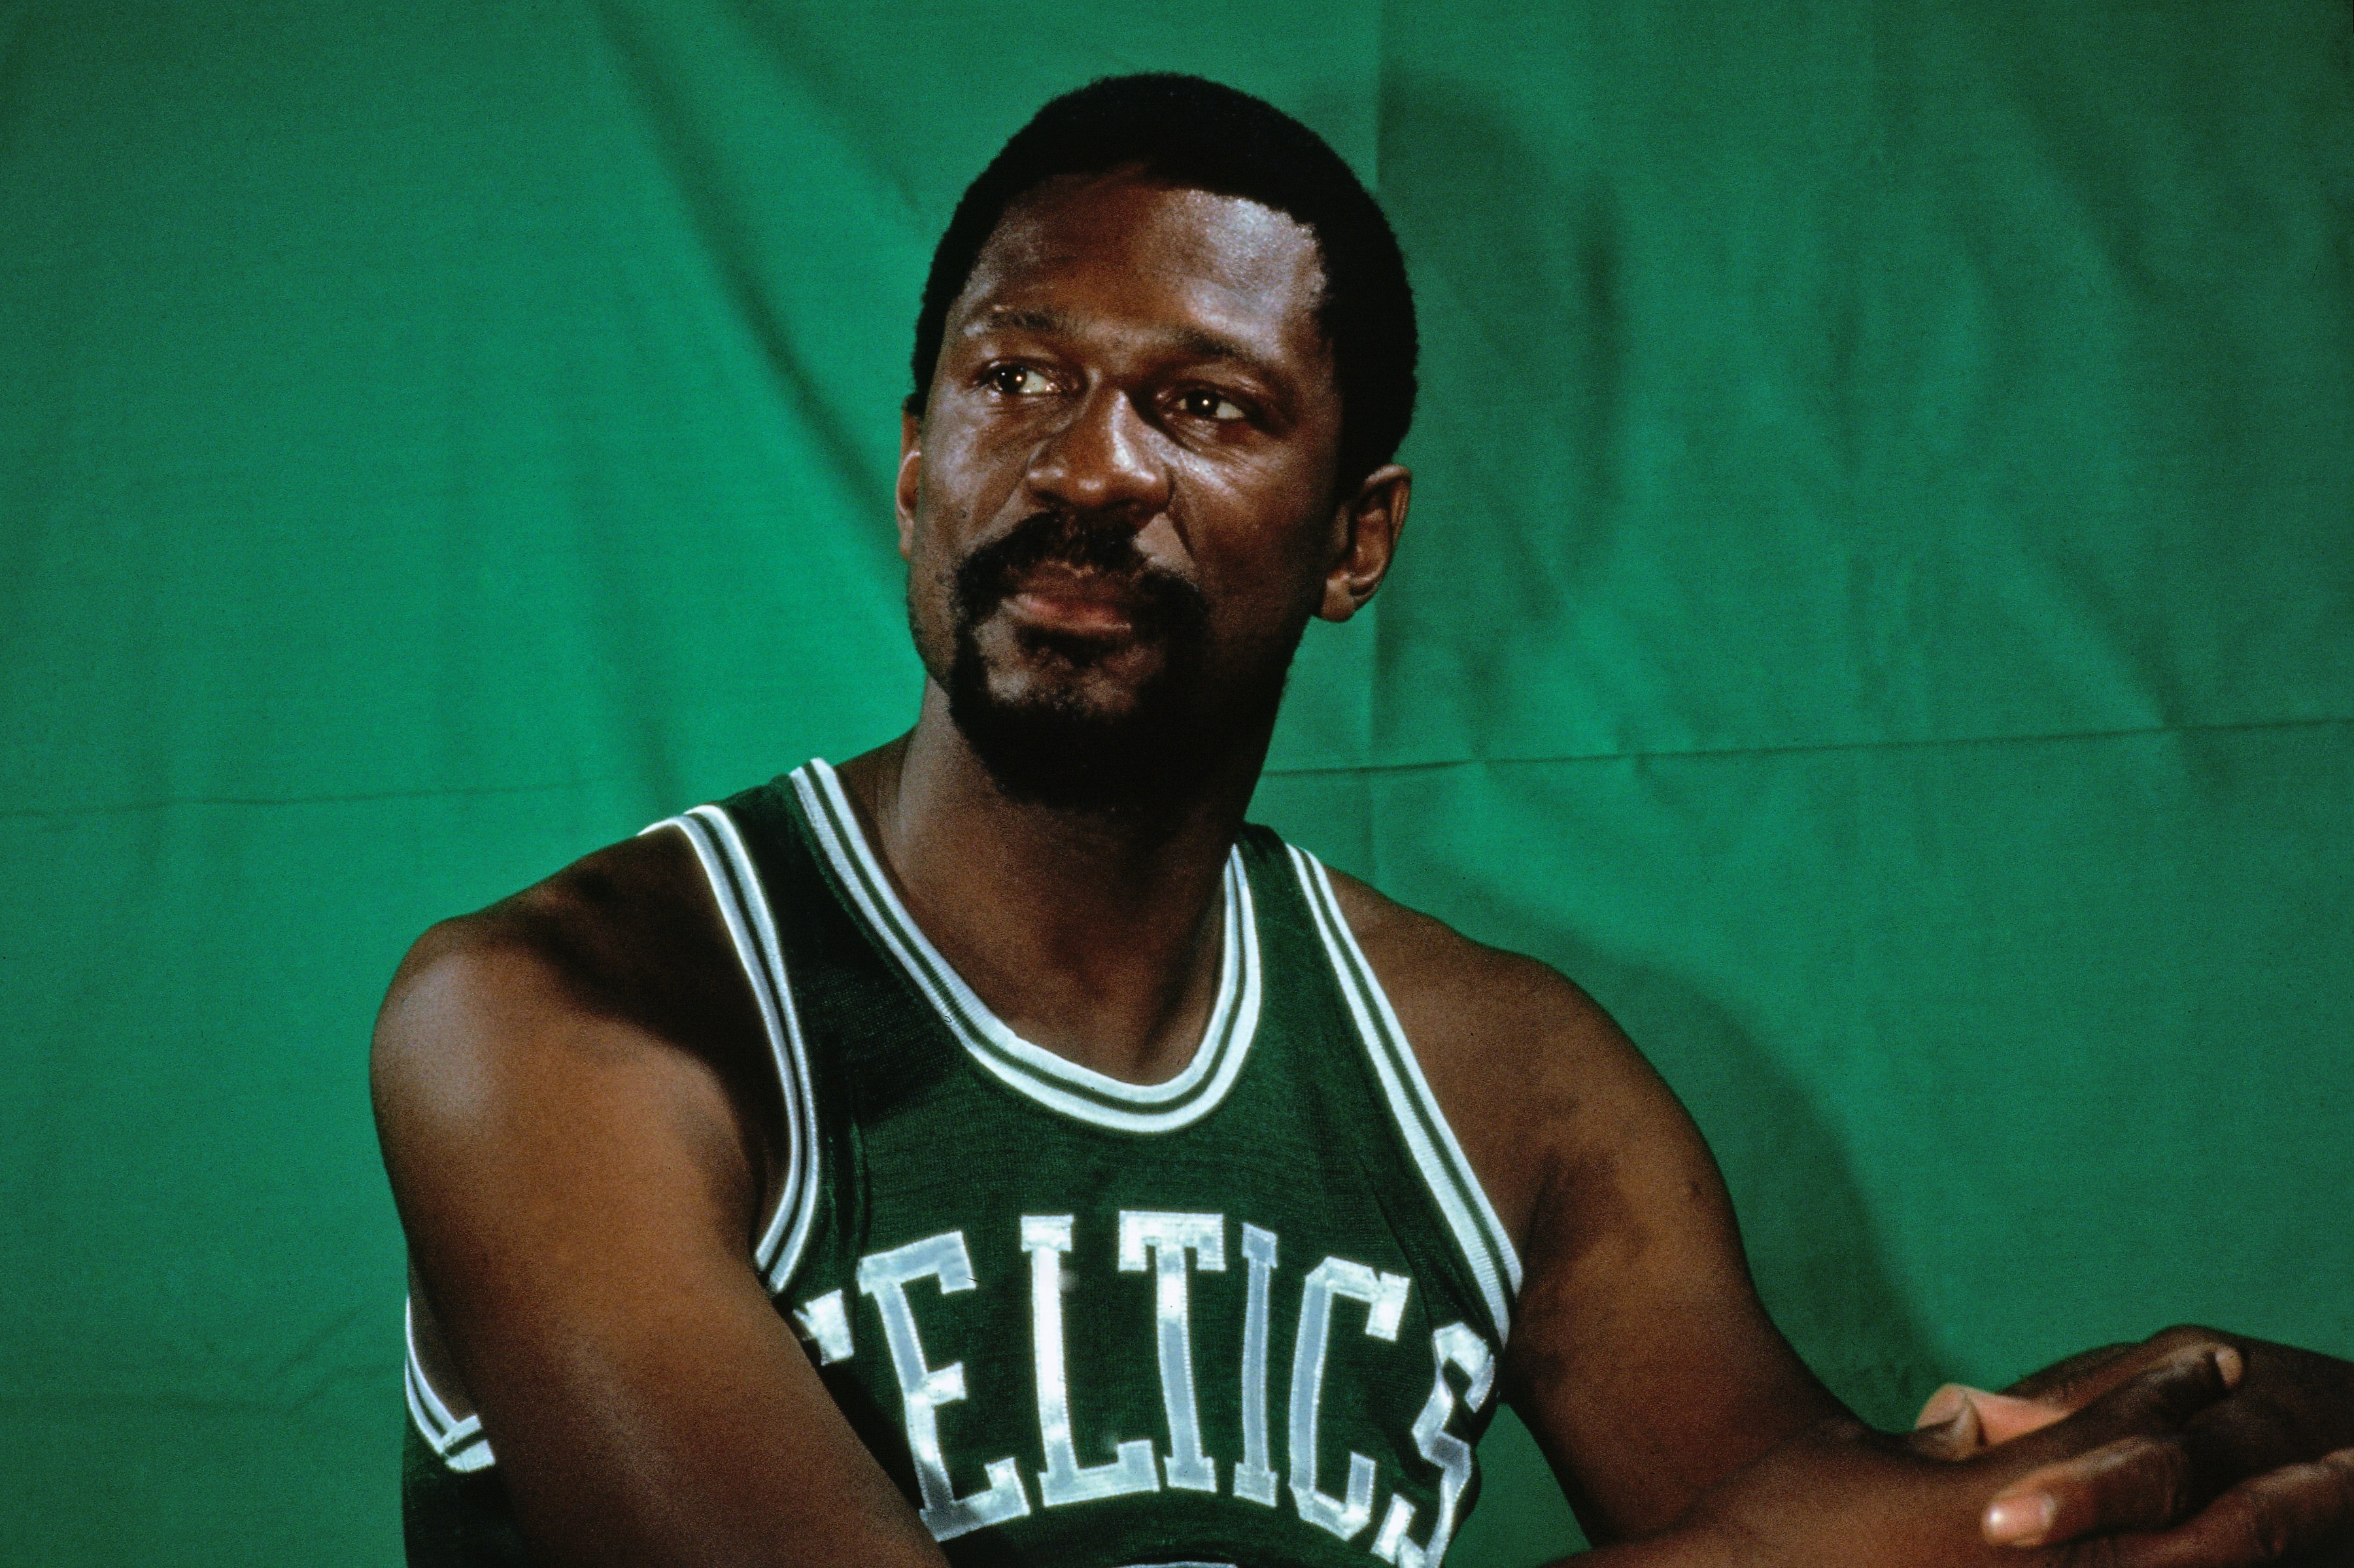 Bill Russell poses for a portrait in 1969 at the Boston Garden in Boston, Massachusetts. | Source: Getty Images